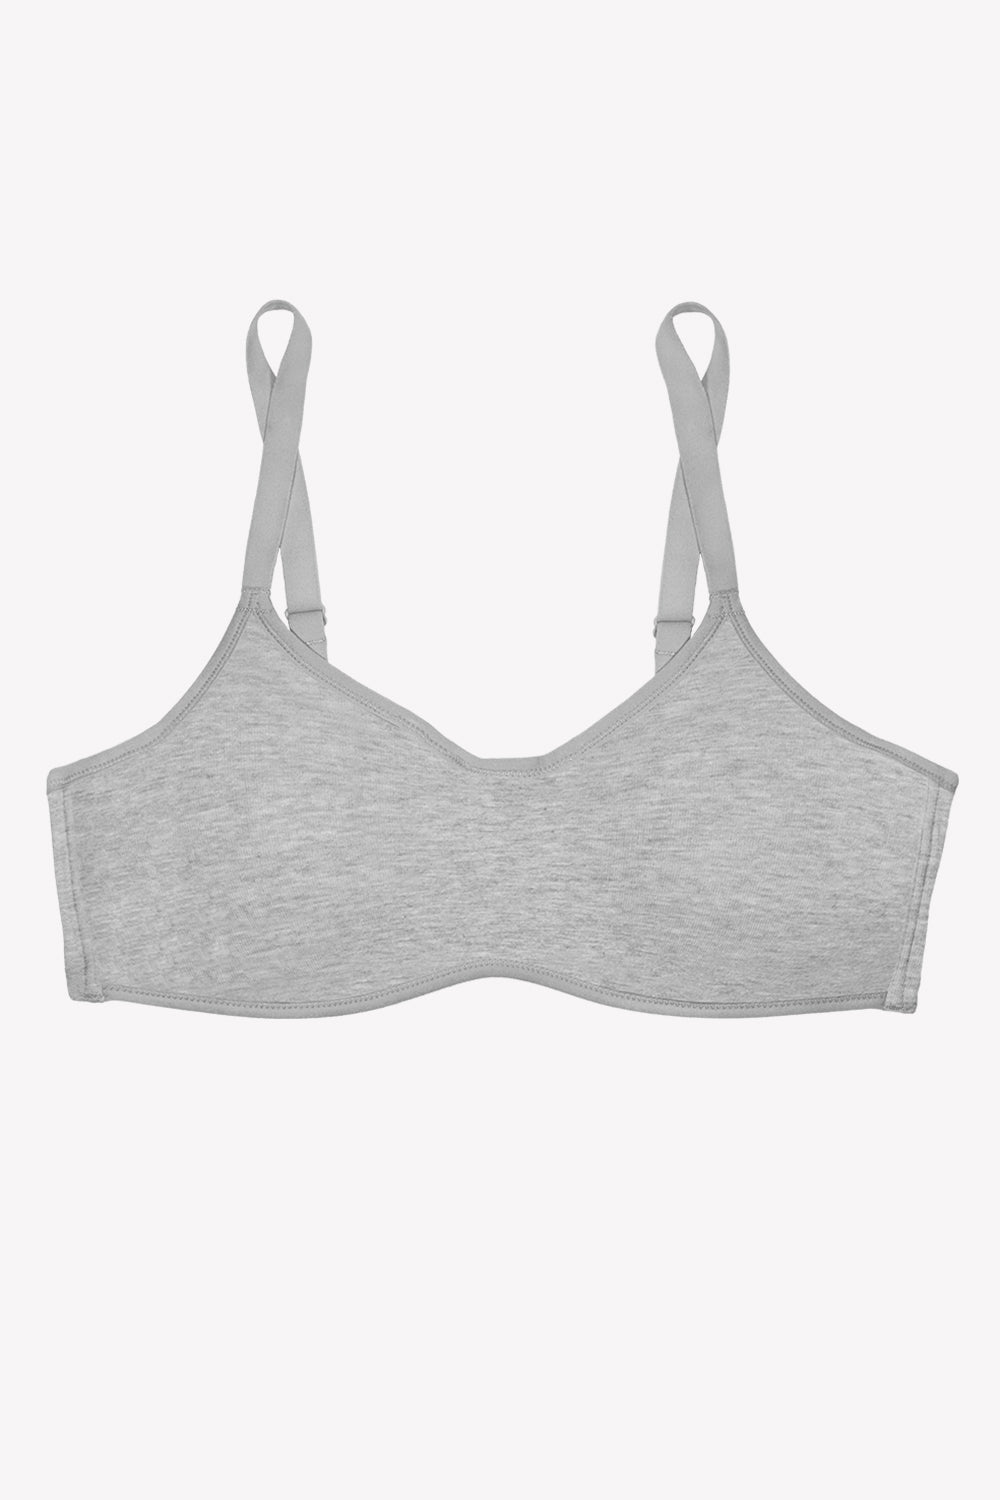 Buy GINGER BY LIFESTYLE Women Grey Solid Bras - 32B at